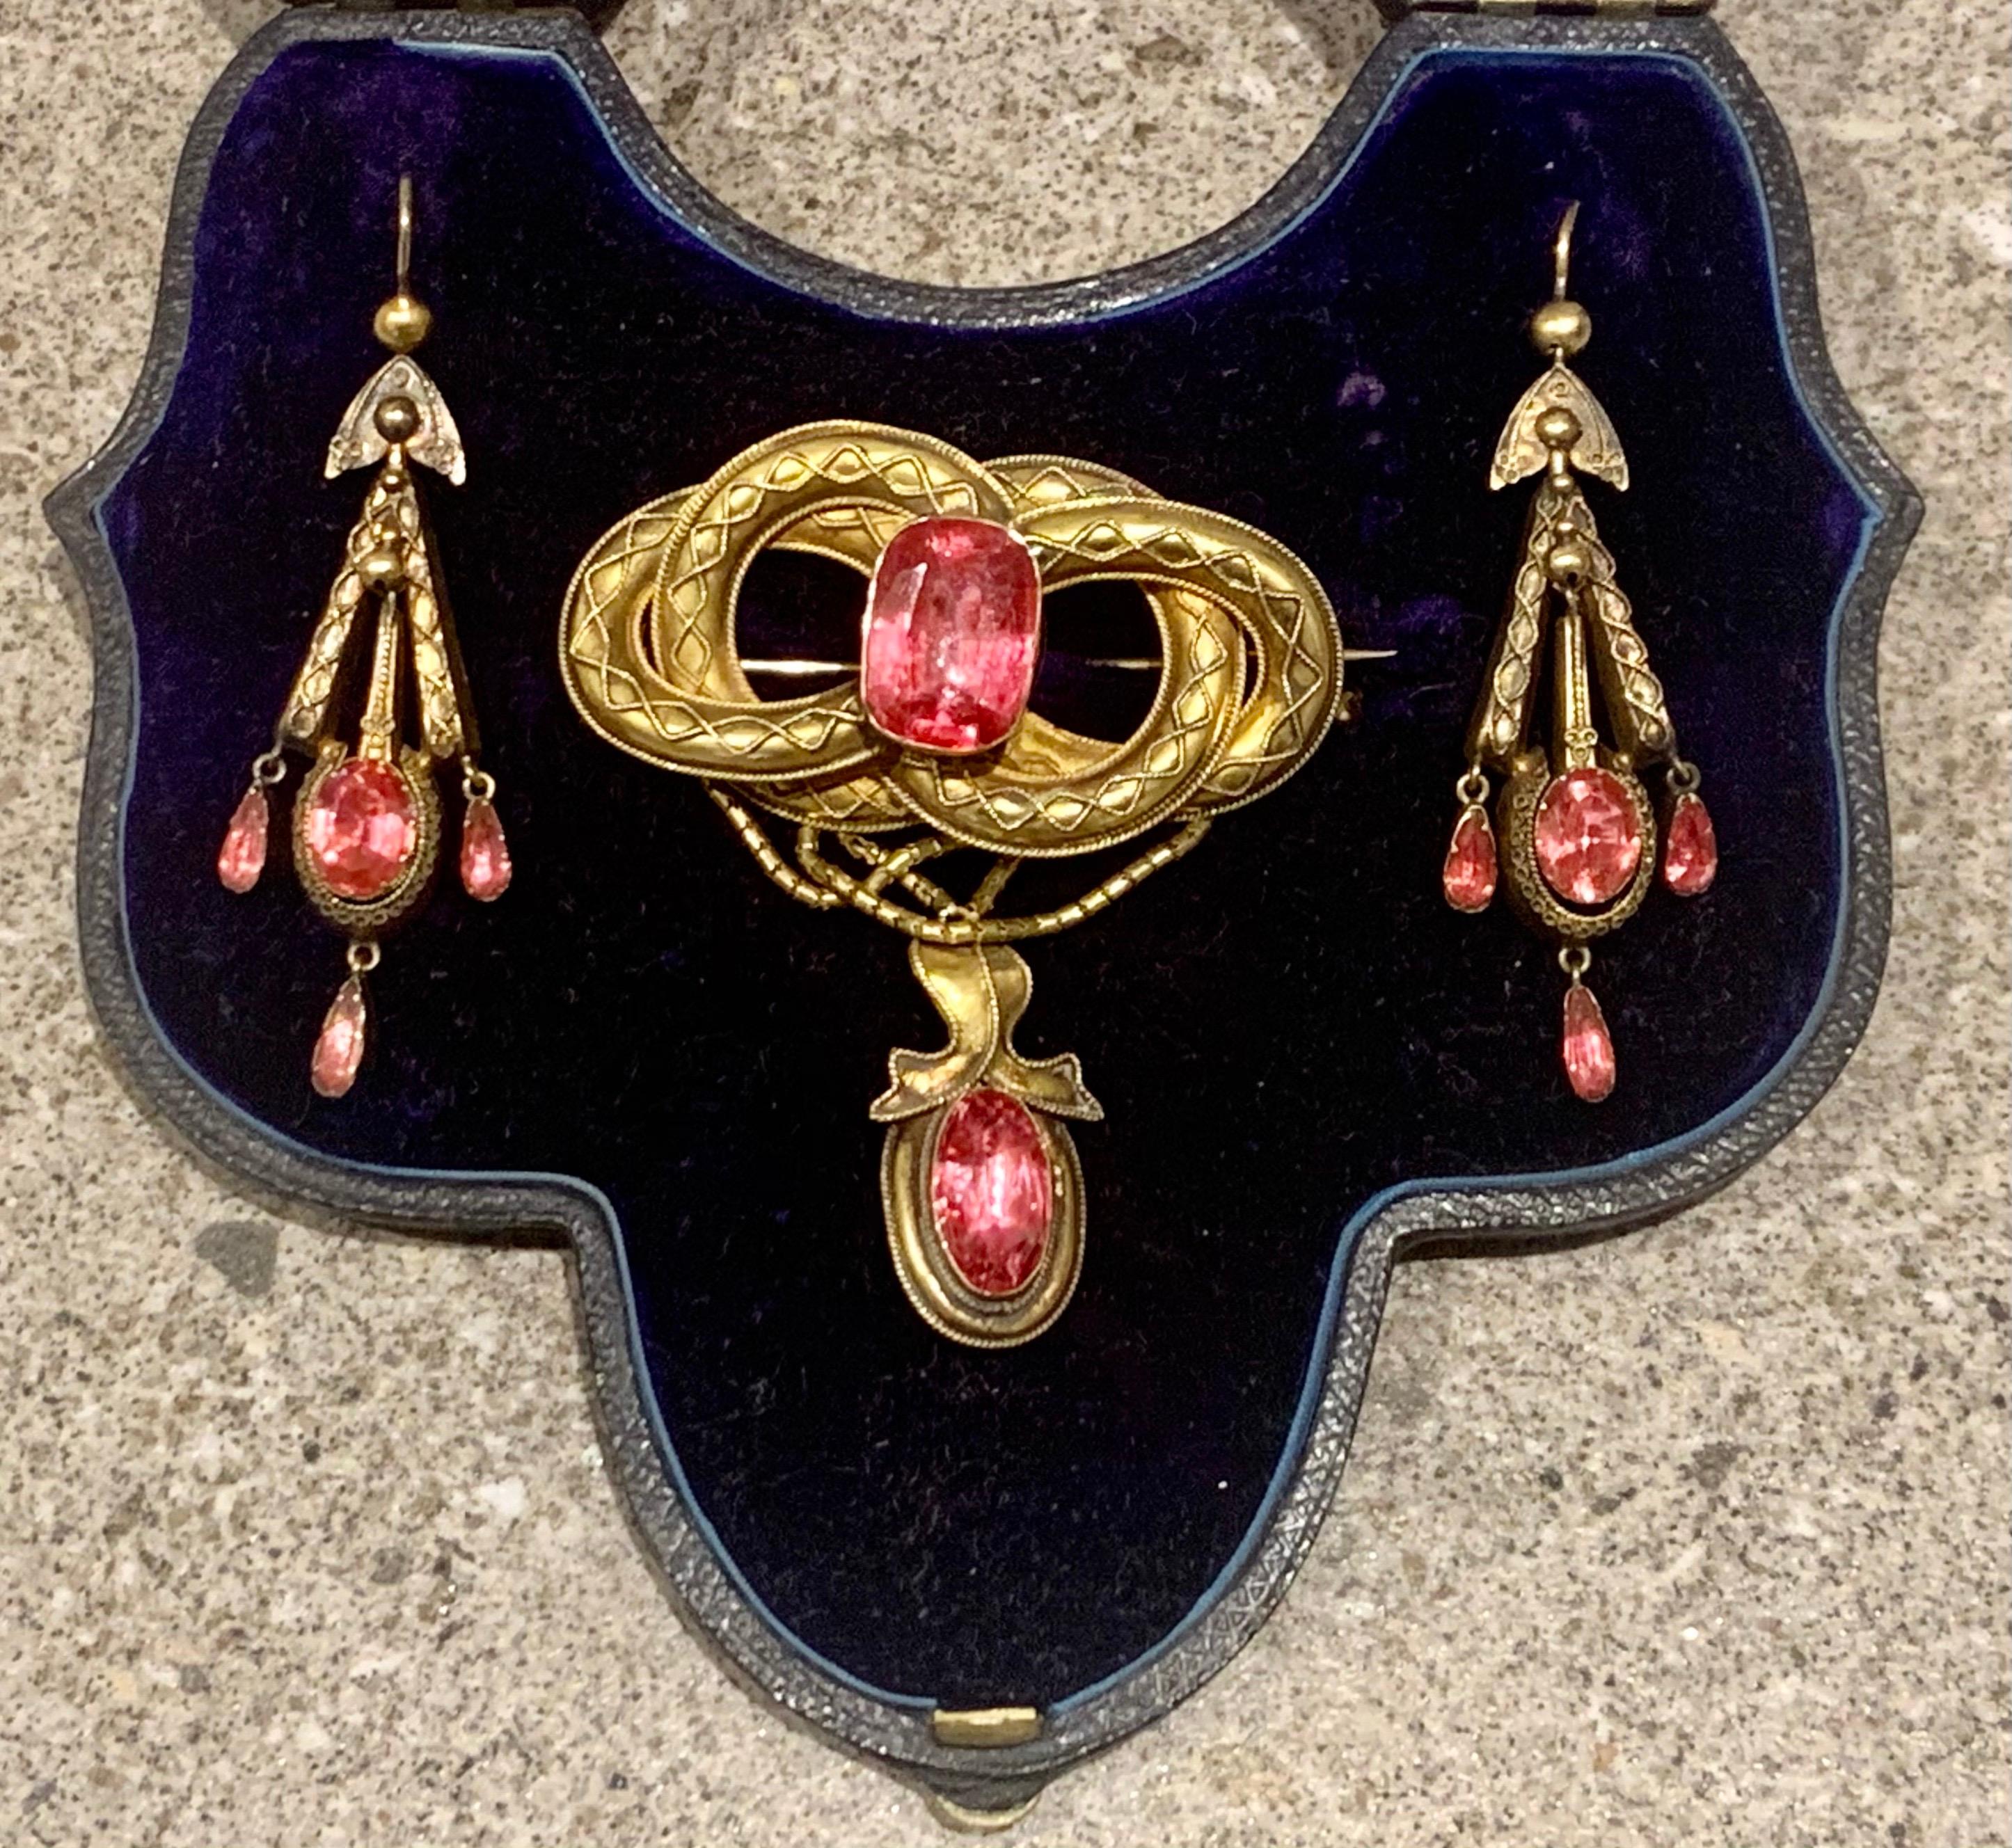 A antique Victorian pink tourmaline set pinchbeck locket back Brooch and Earring Set In superb antique condition. In the original antique velvet lined dome top presentation box. The brooch is (6 cm) Tal by (5.2 cm) wide,
In very nice antique